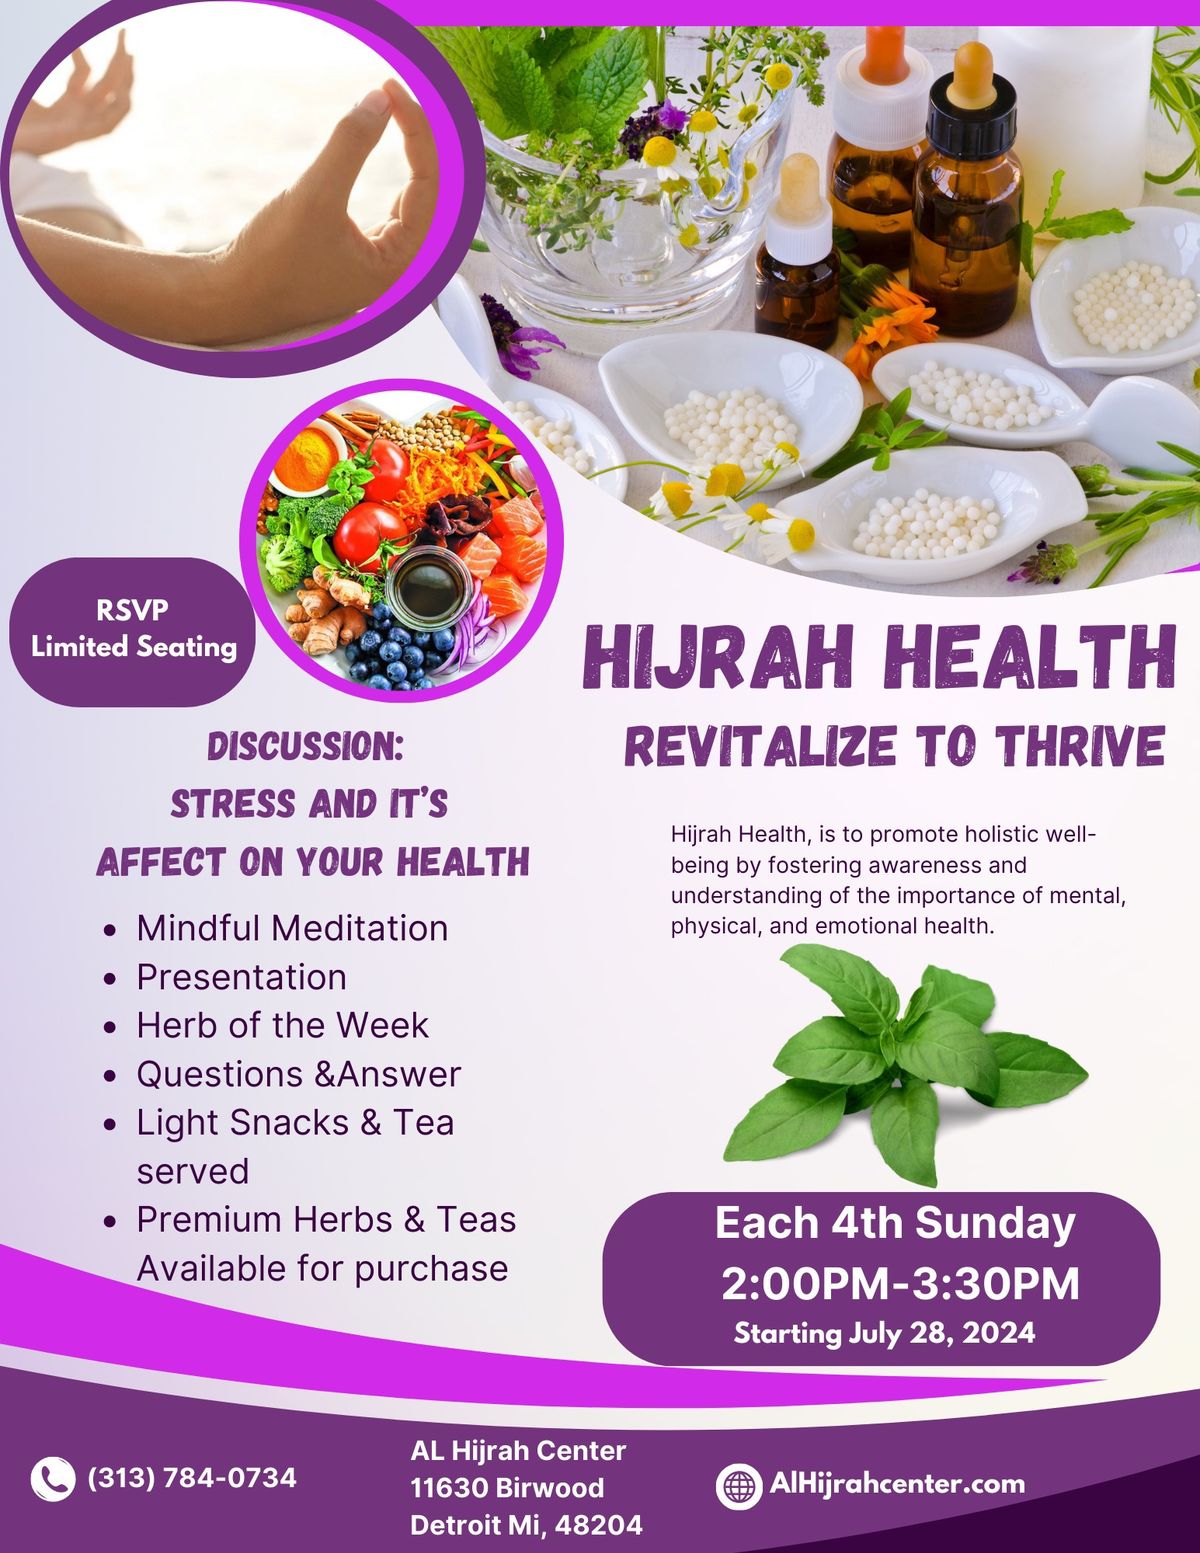 Revitalize to Thrive